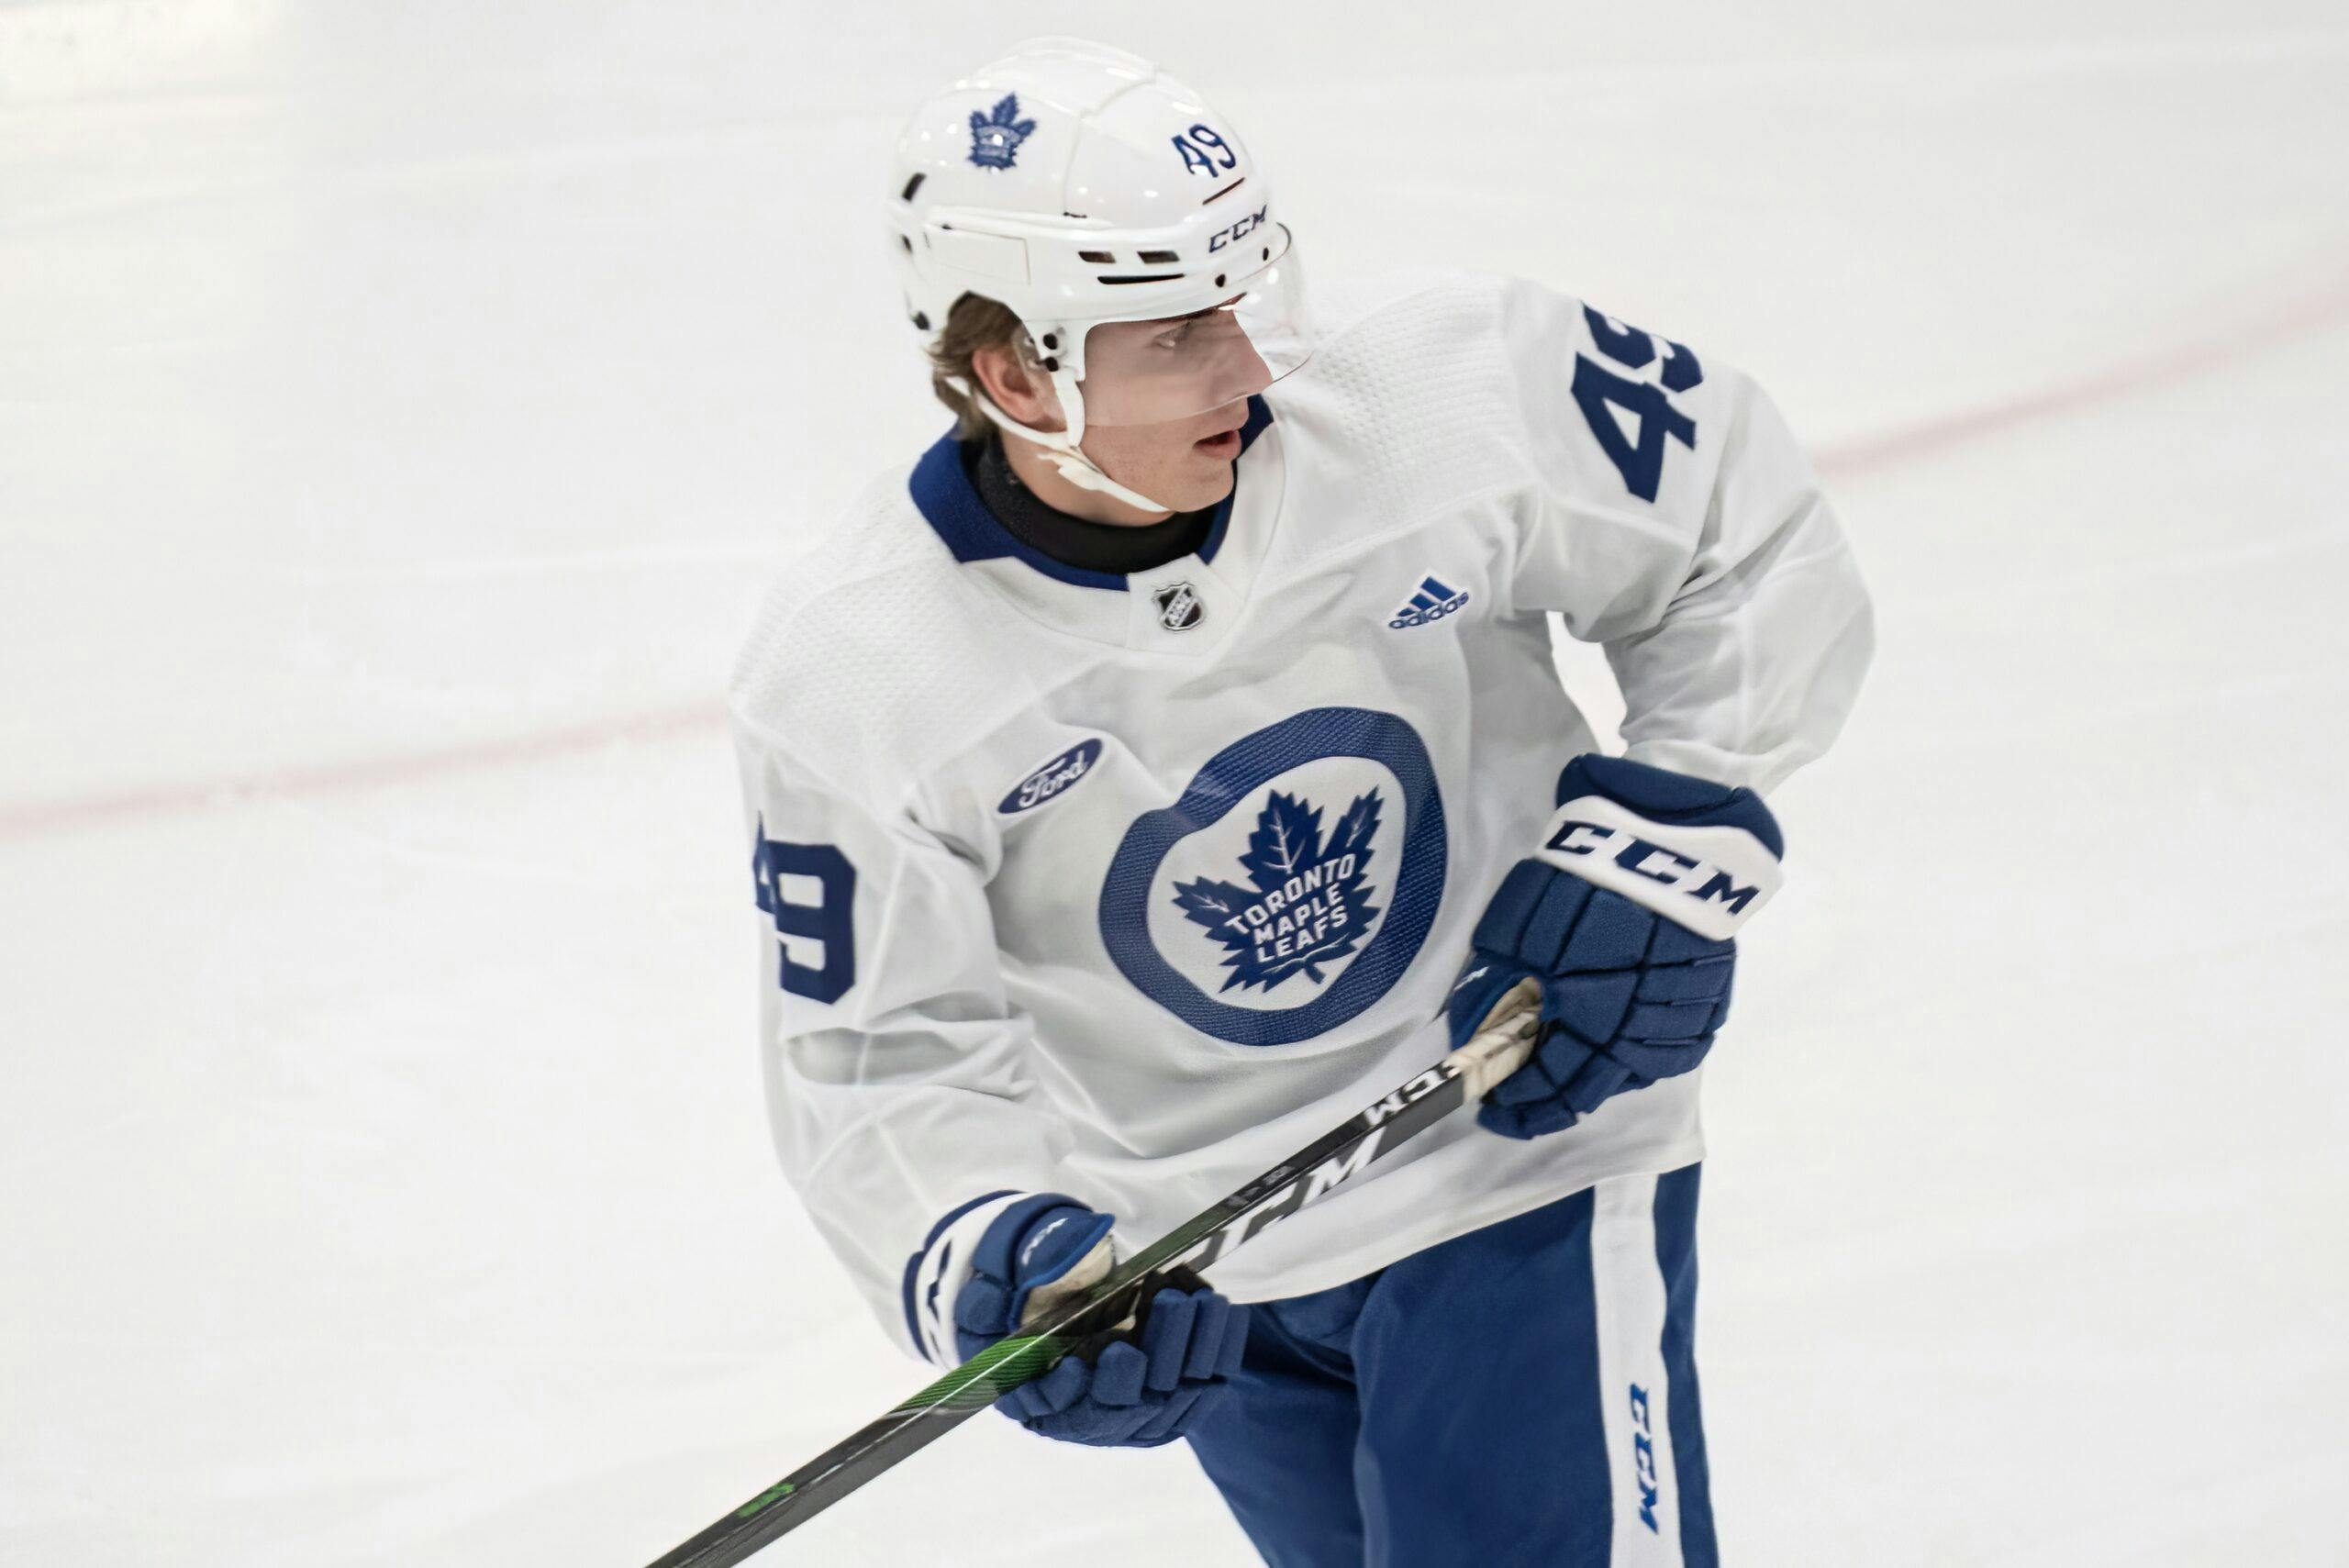 Top 10 World Junior Performances by Current Toronto Maple Leafs